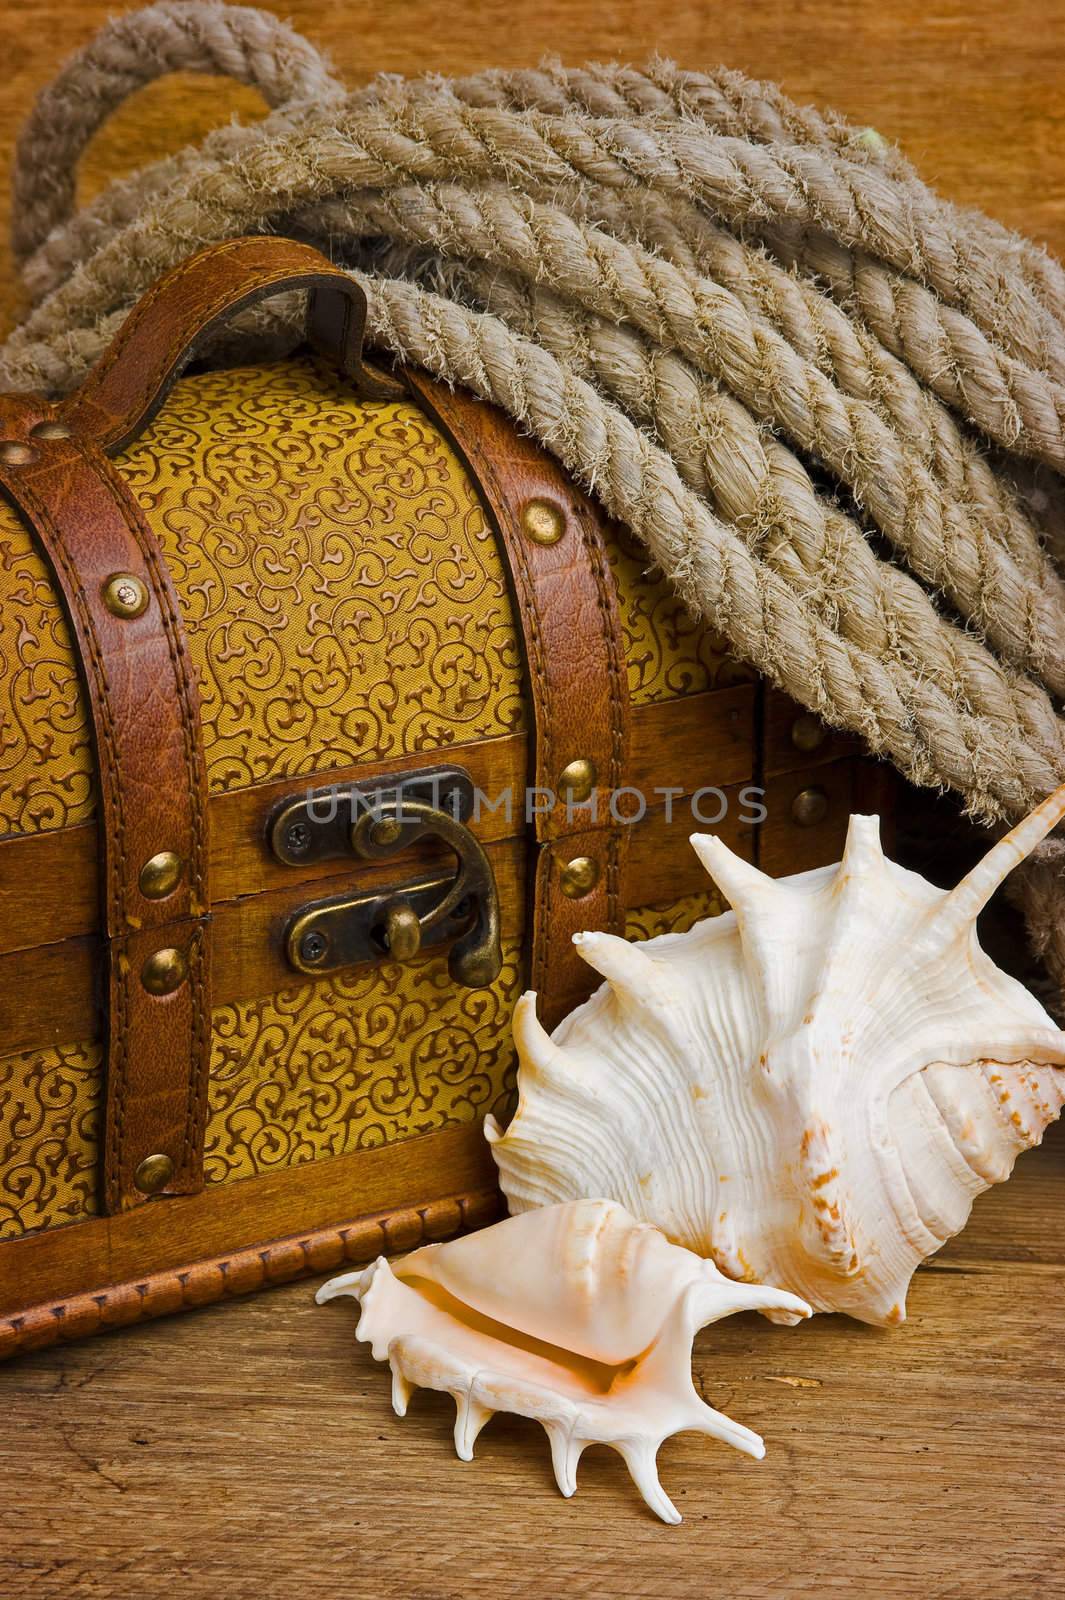 Pirate treasure chest against the old wooden boards